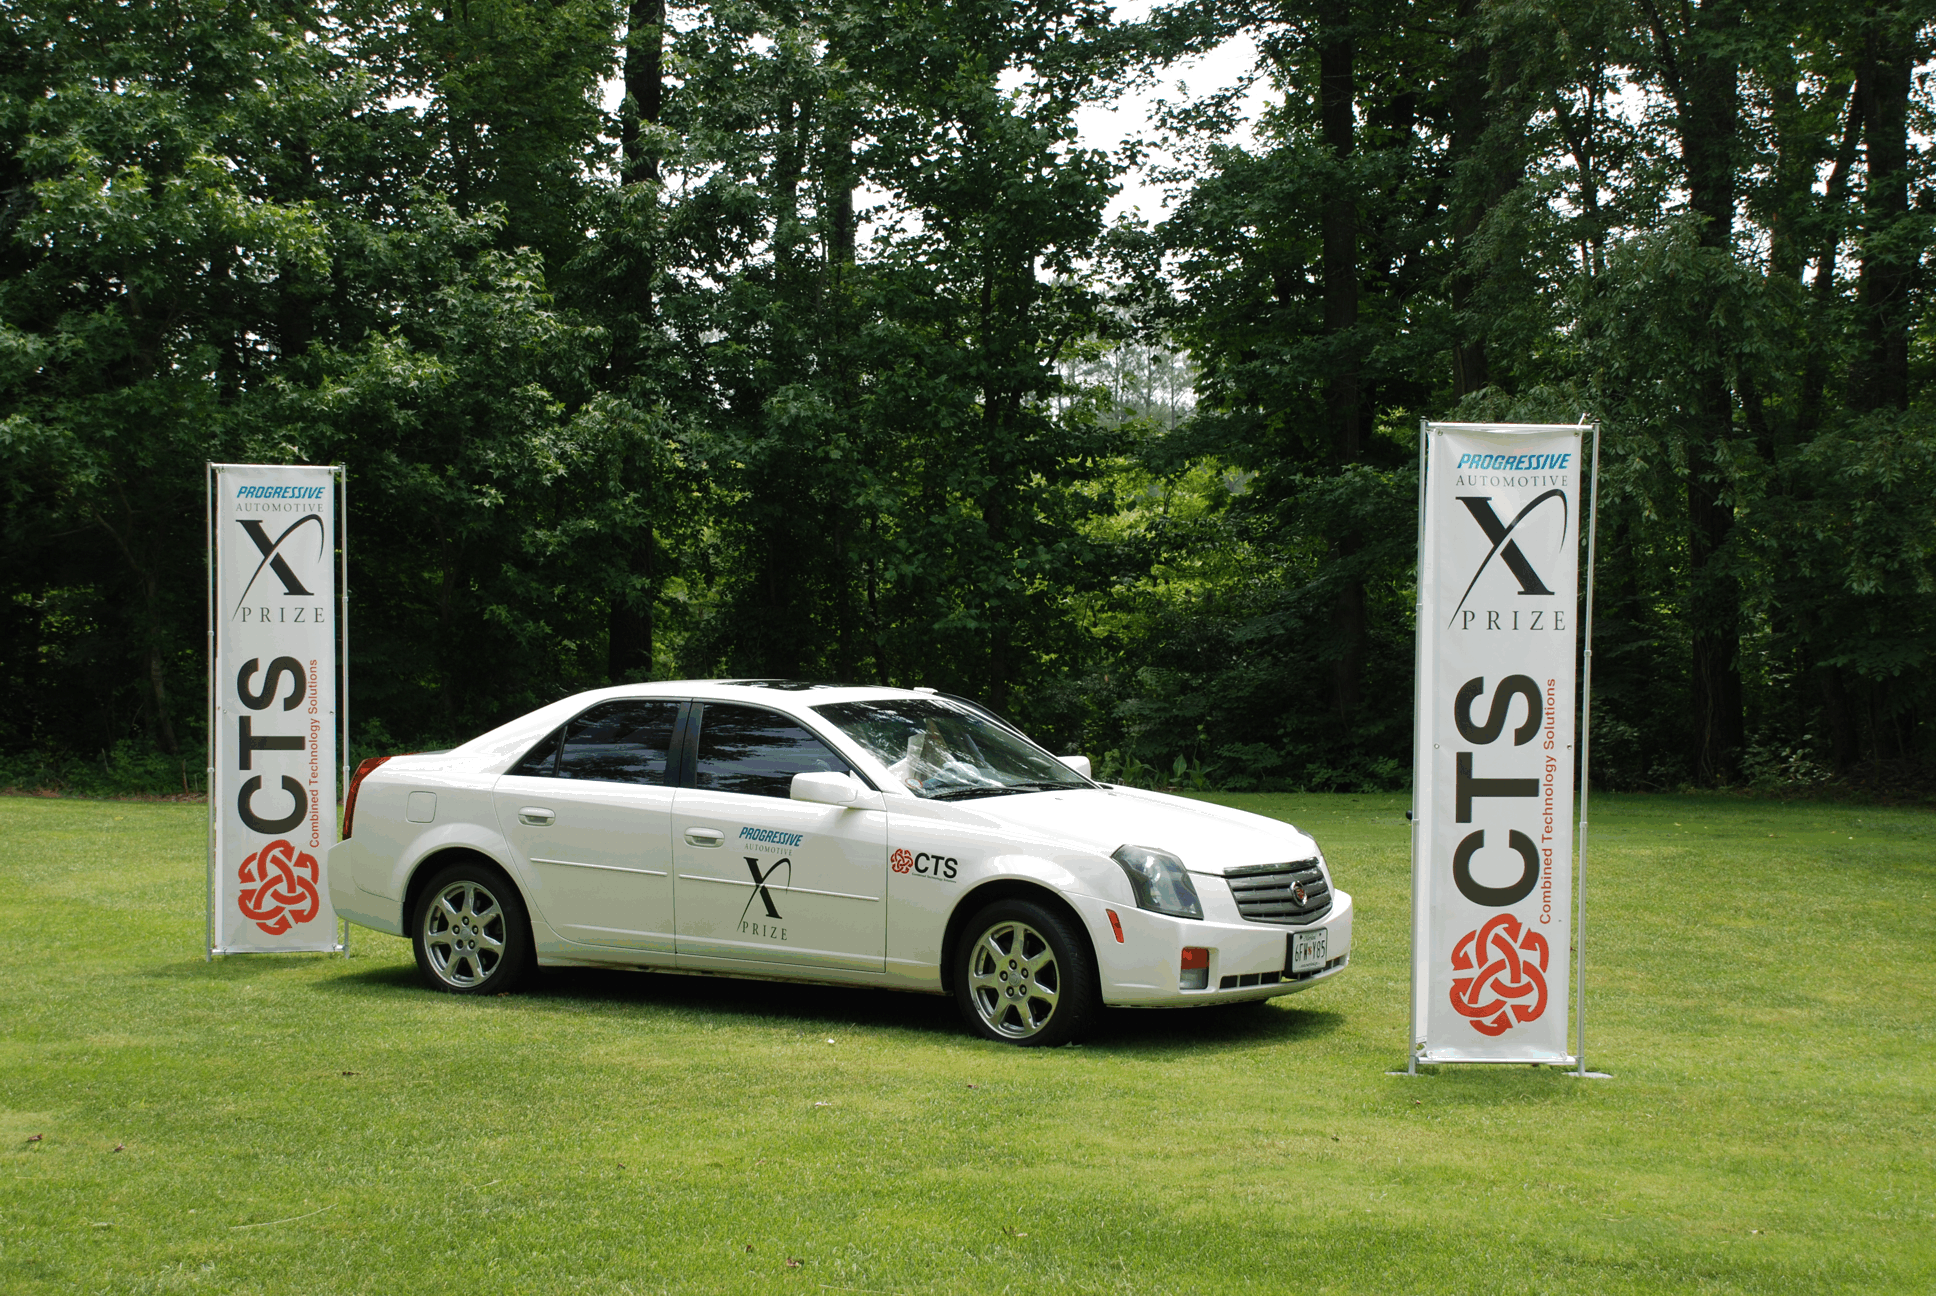 CTS on course